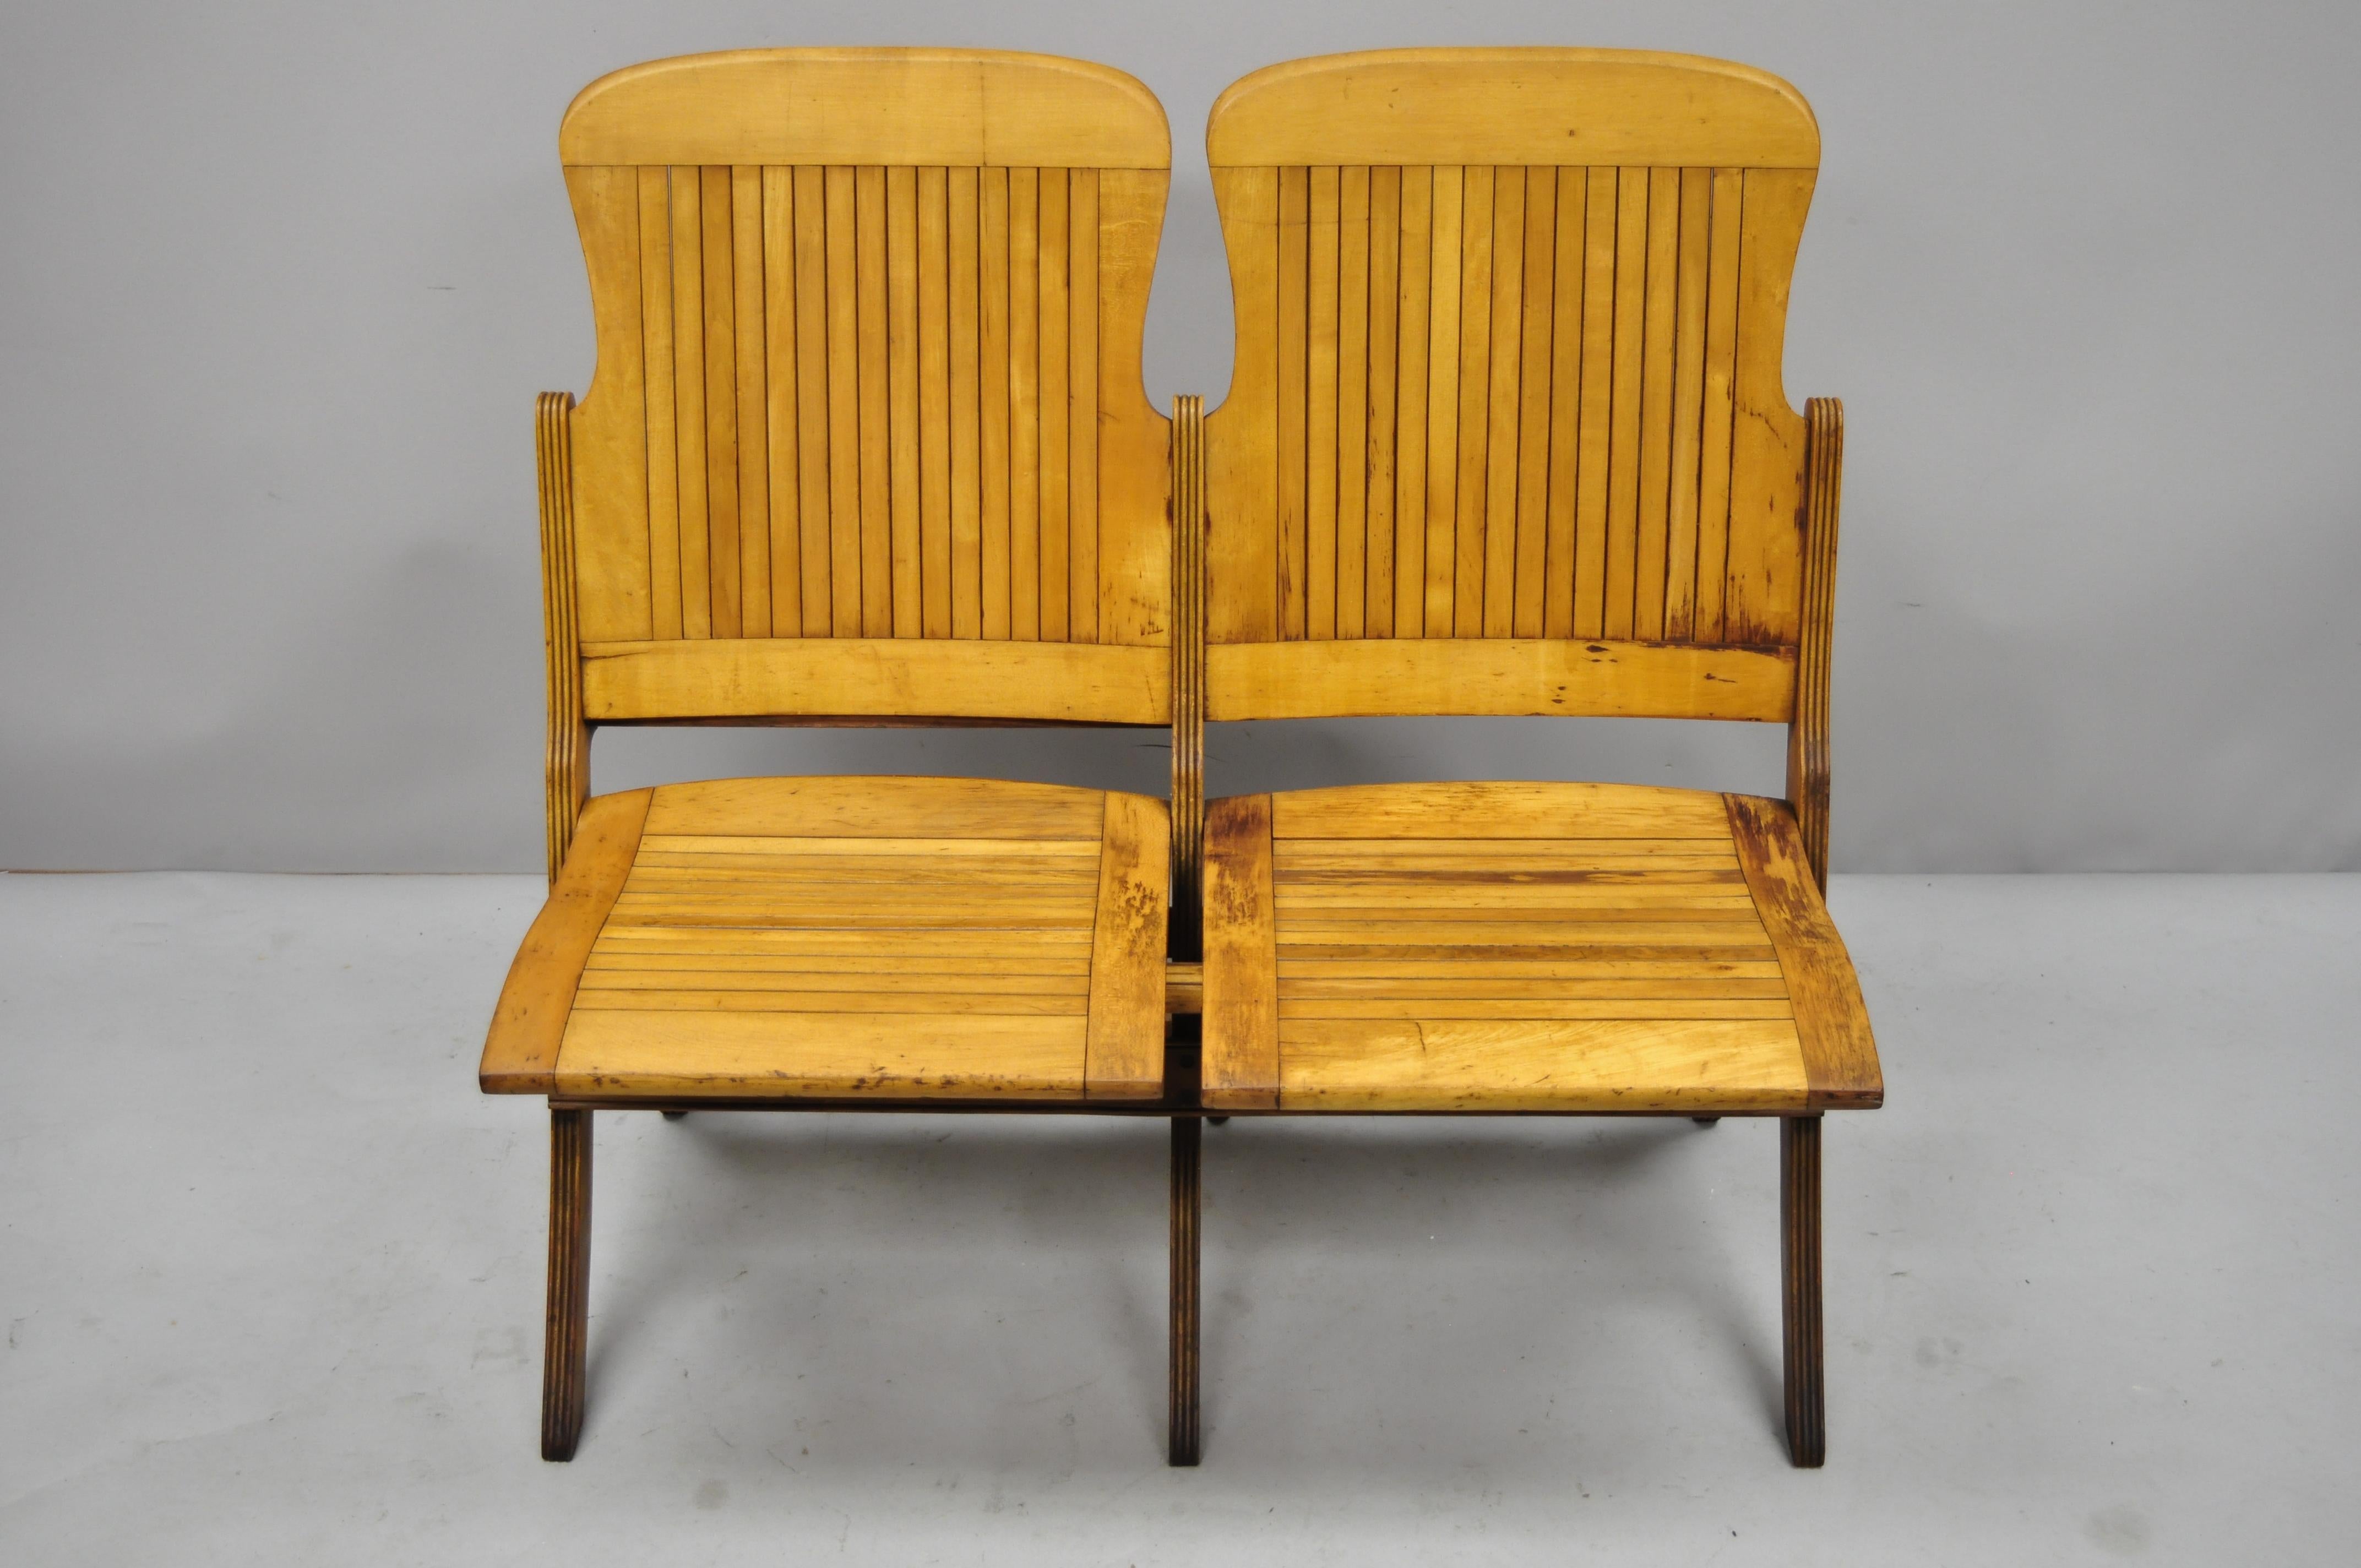 antique double wooden folding chairs